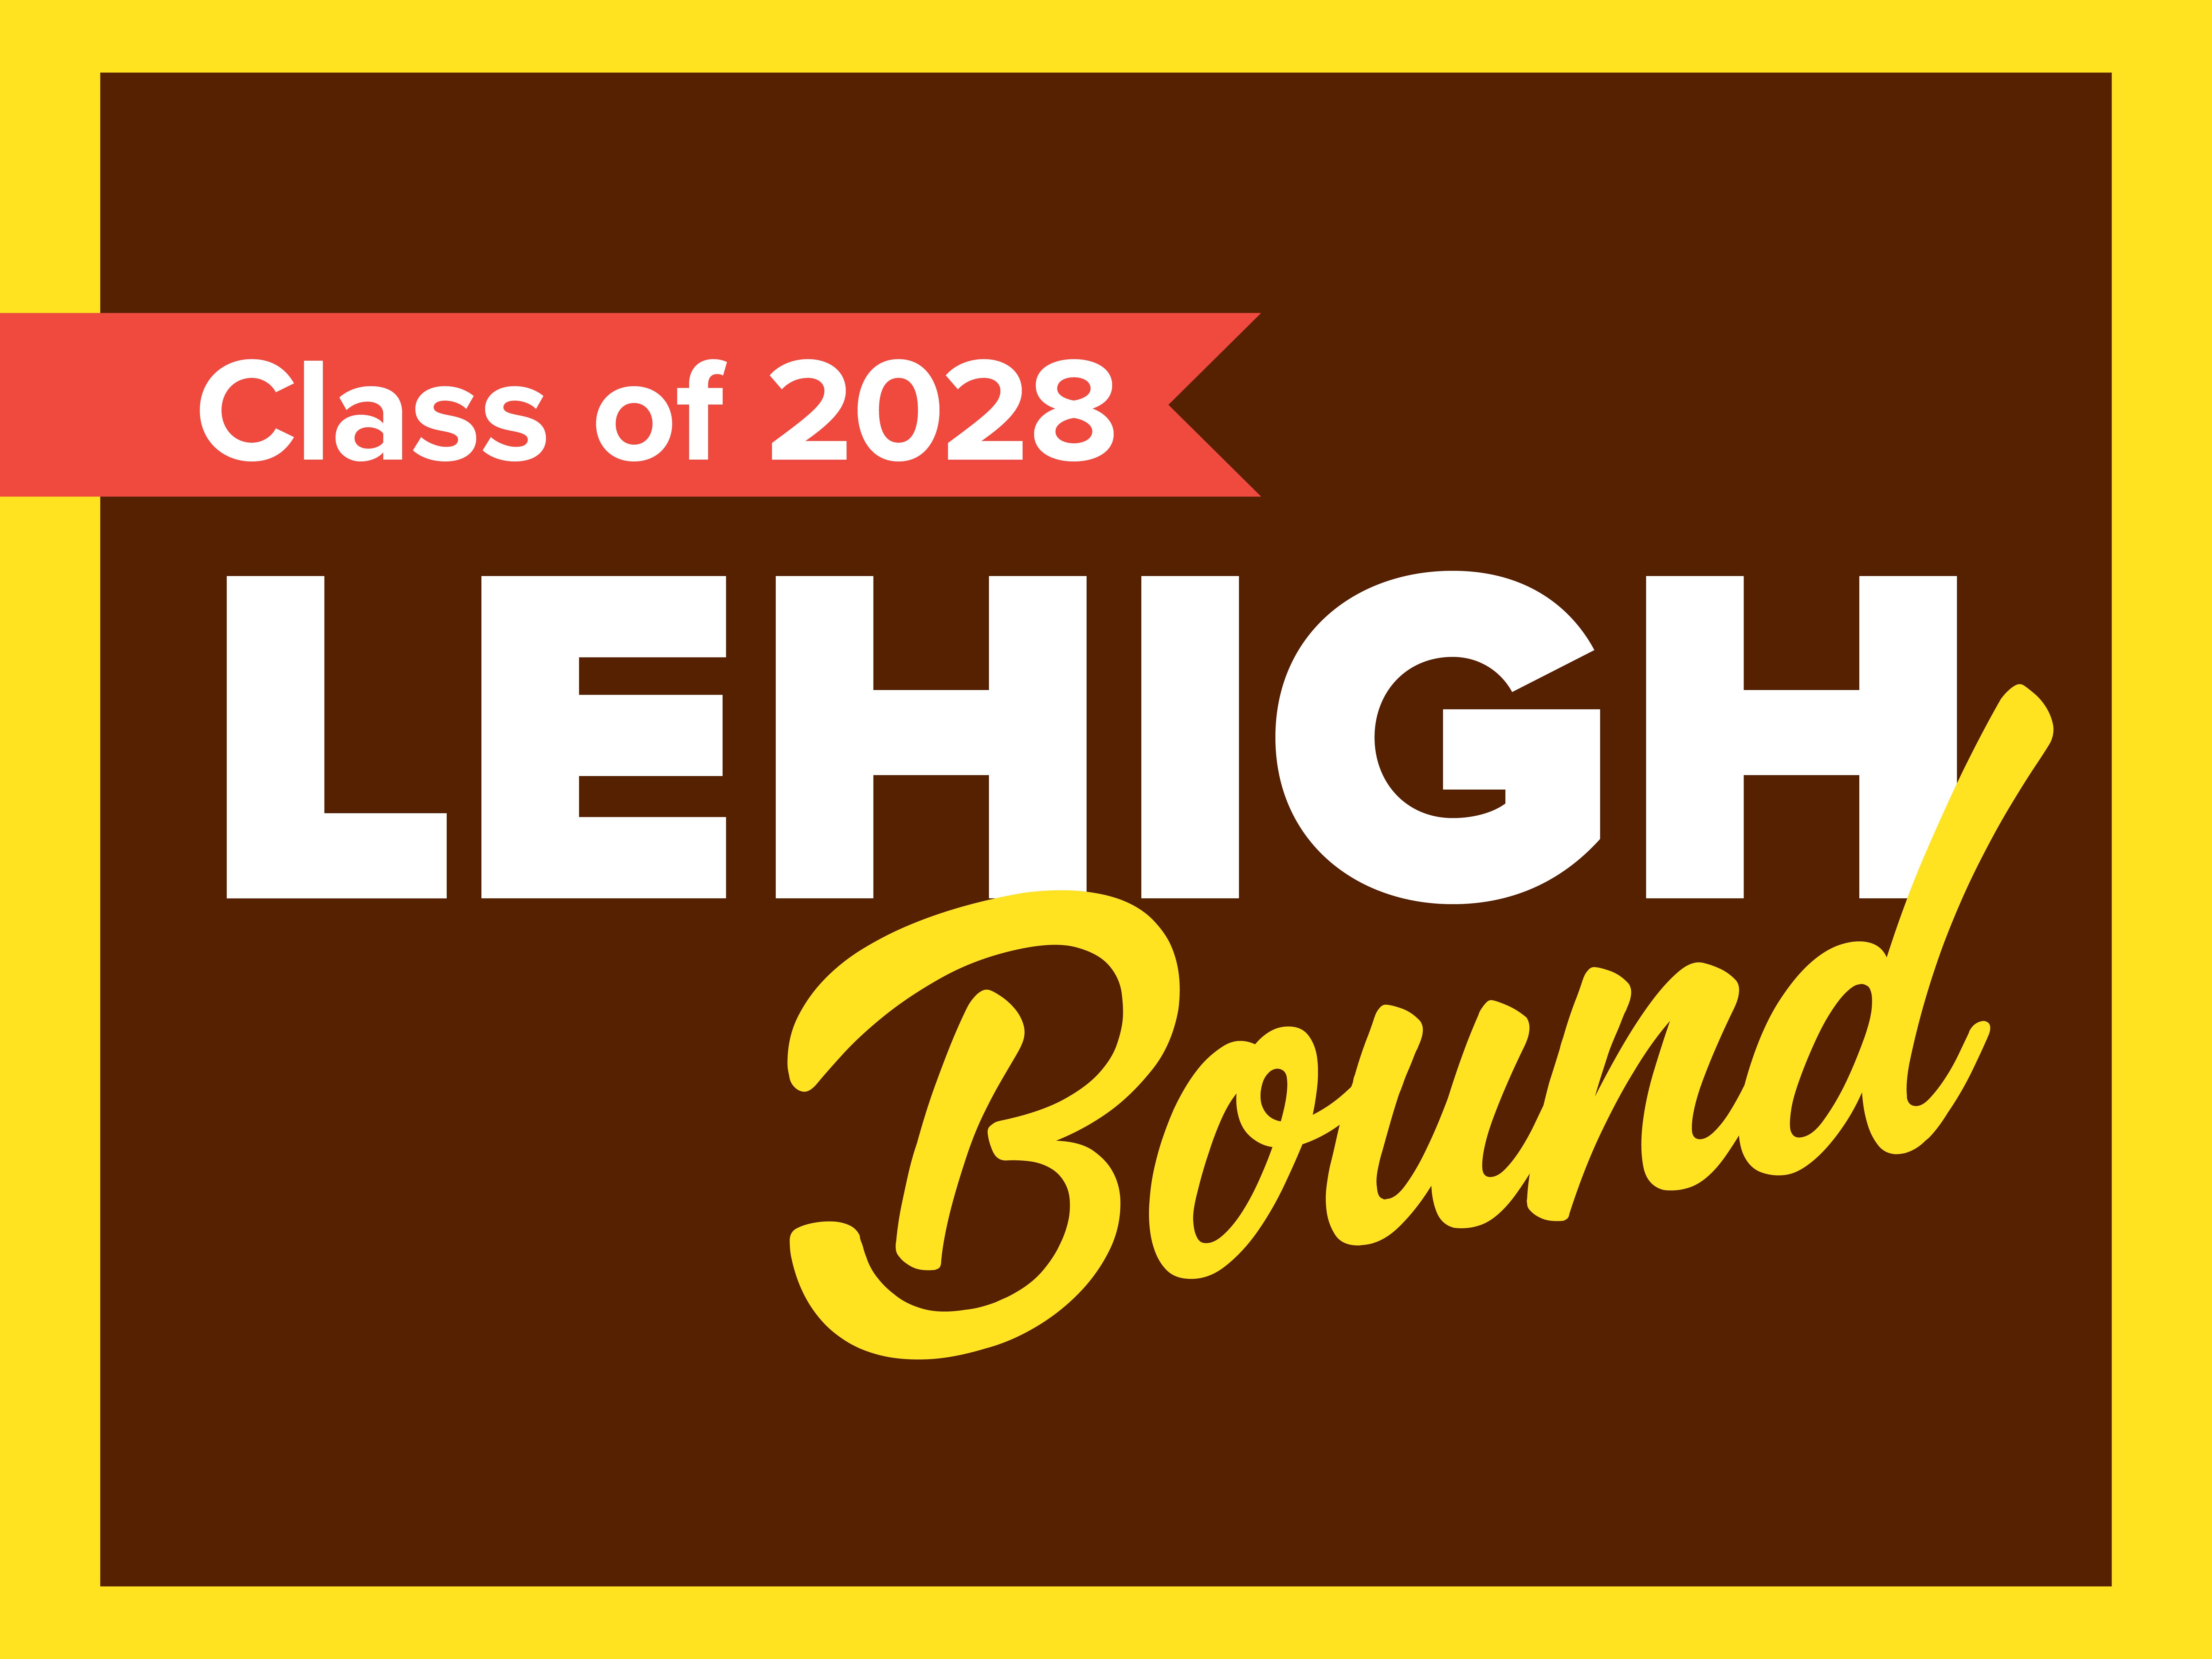 18x24 Class of 2028 Lawn sign #2